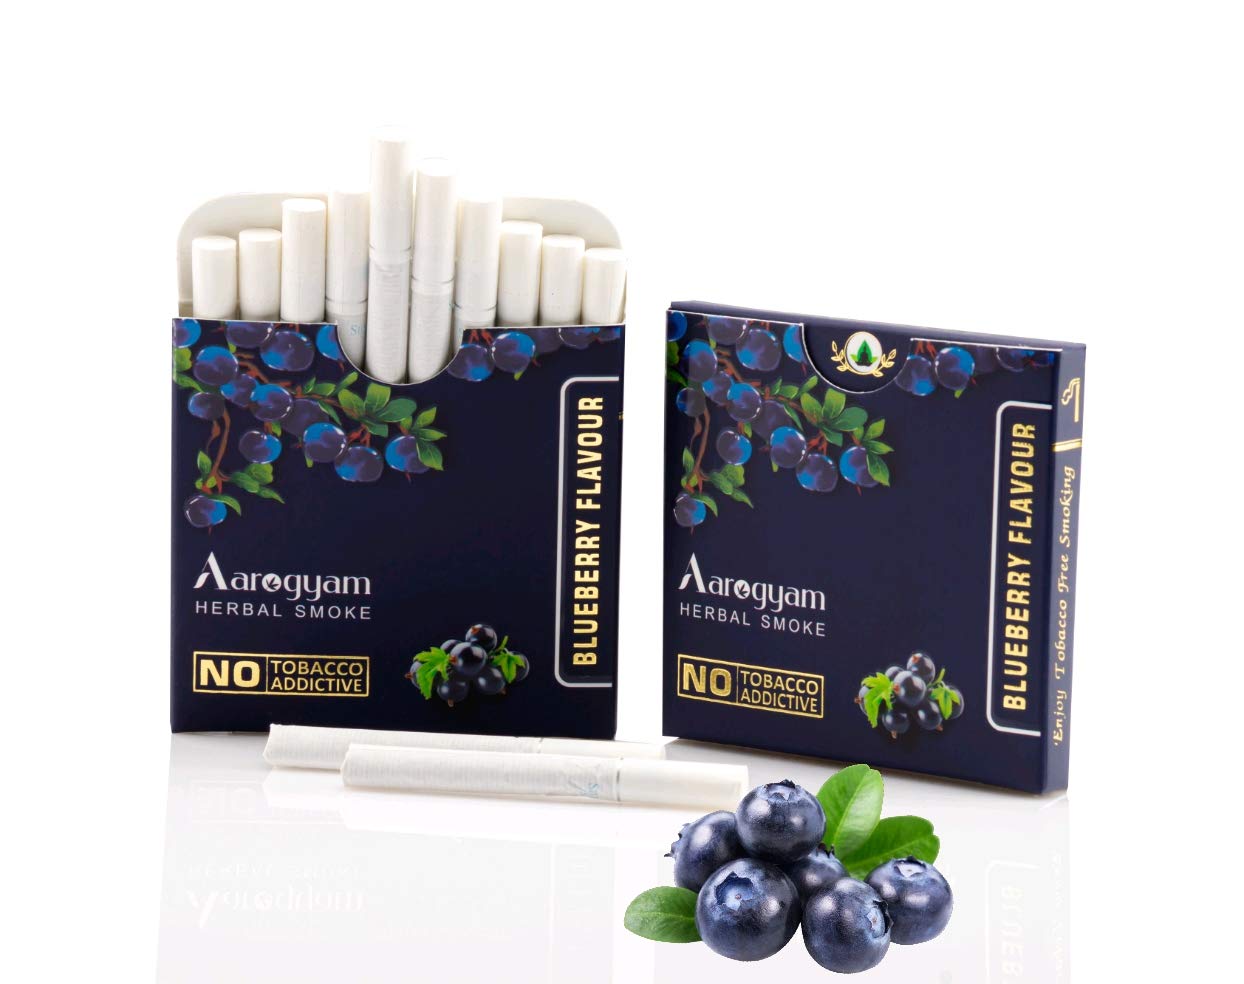 Herbals Cigarette Tobaccoo & Nicotine Free Smoke, For Relieve Stress & Mood Enhance Product For Smokers MINT,,BLACK CURRENT,BLUEBERRY,CLOVE ,LEMON FLAVOURS